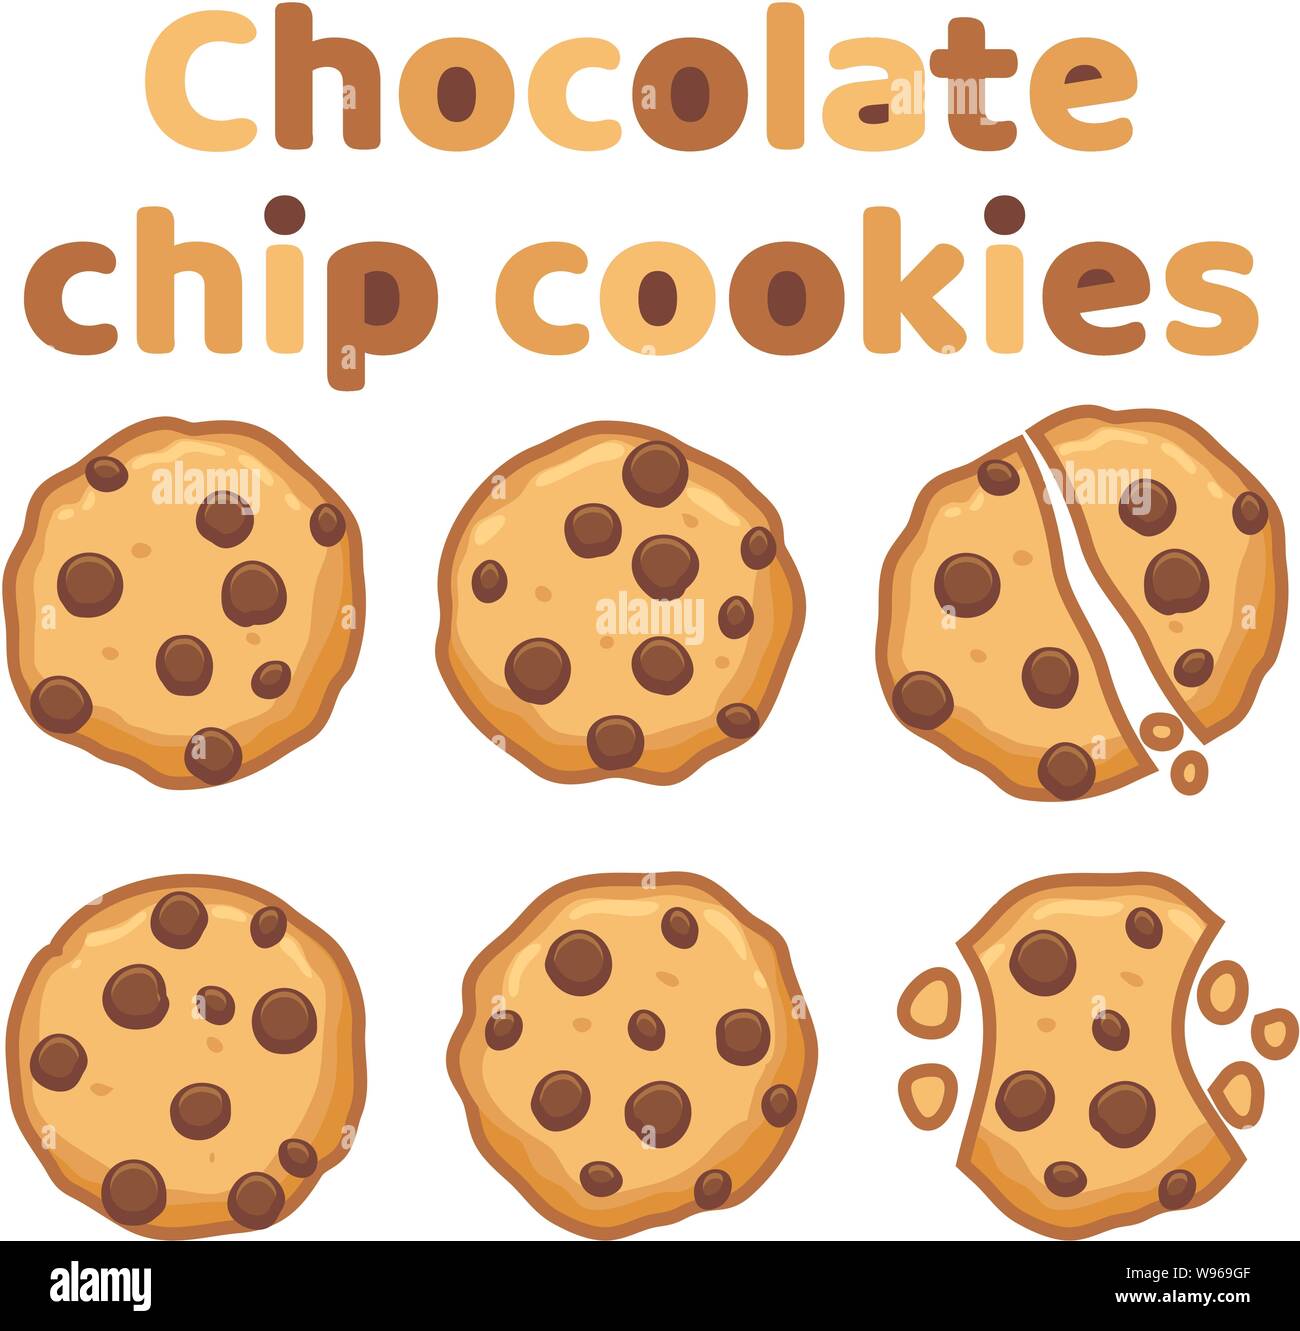 vector set of chocolate chip whole, broken and bitten cookies isolated on white background. symbols of homemade biscuit choc cookie with a bite and cr Stock Vector